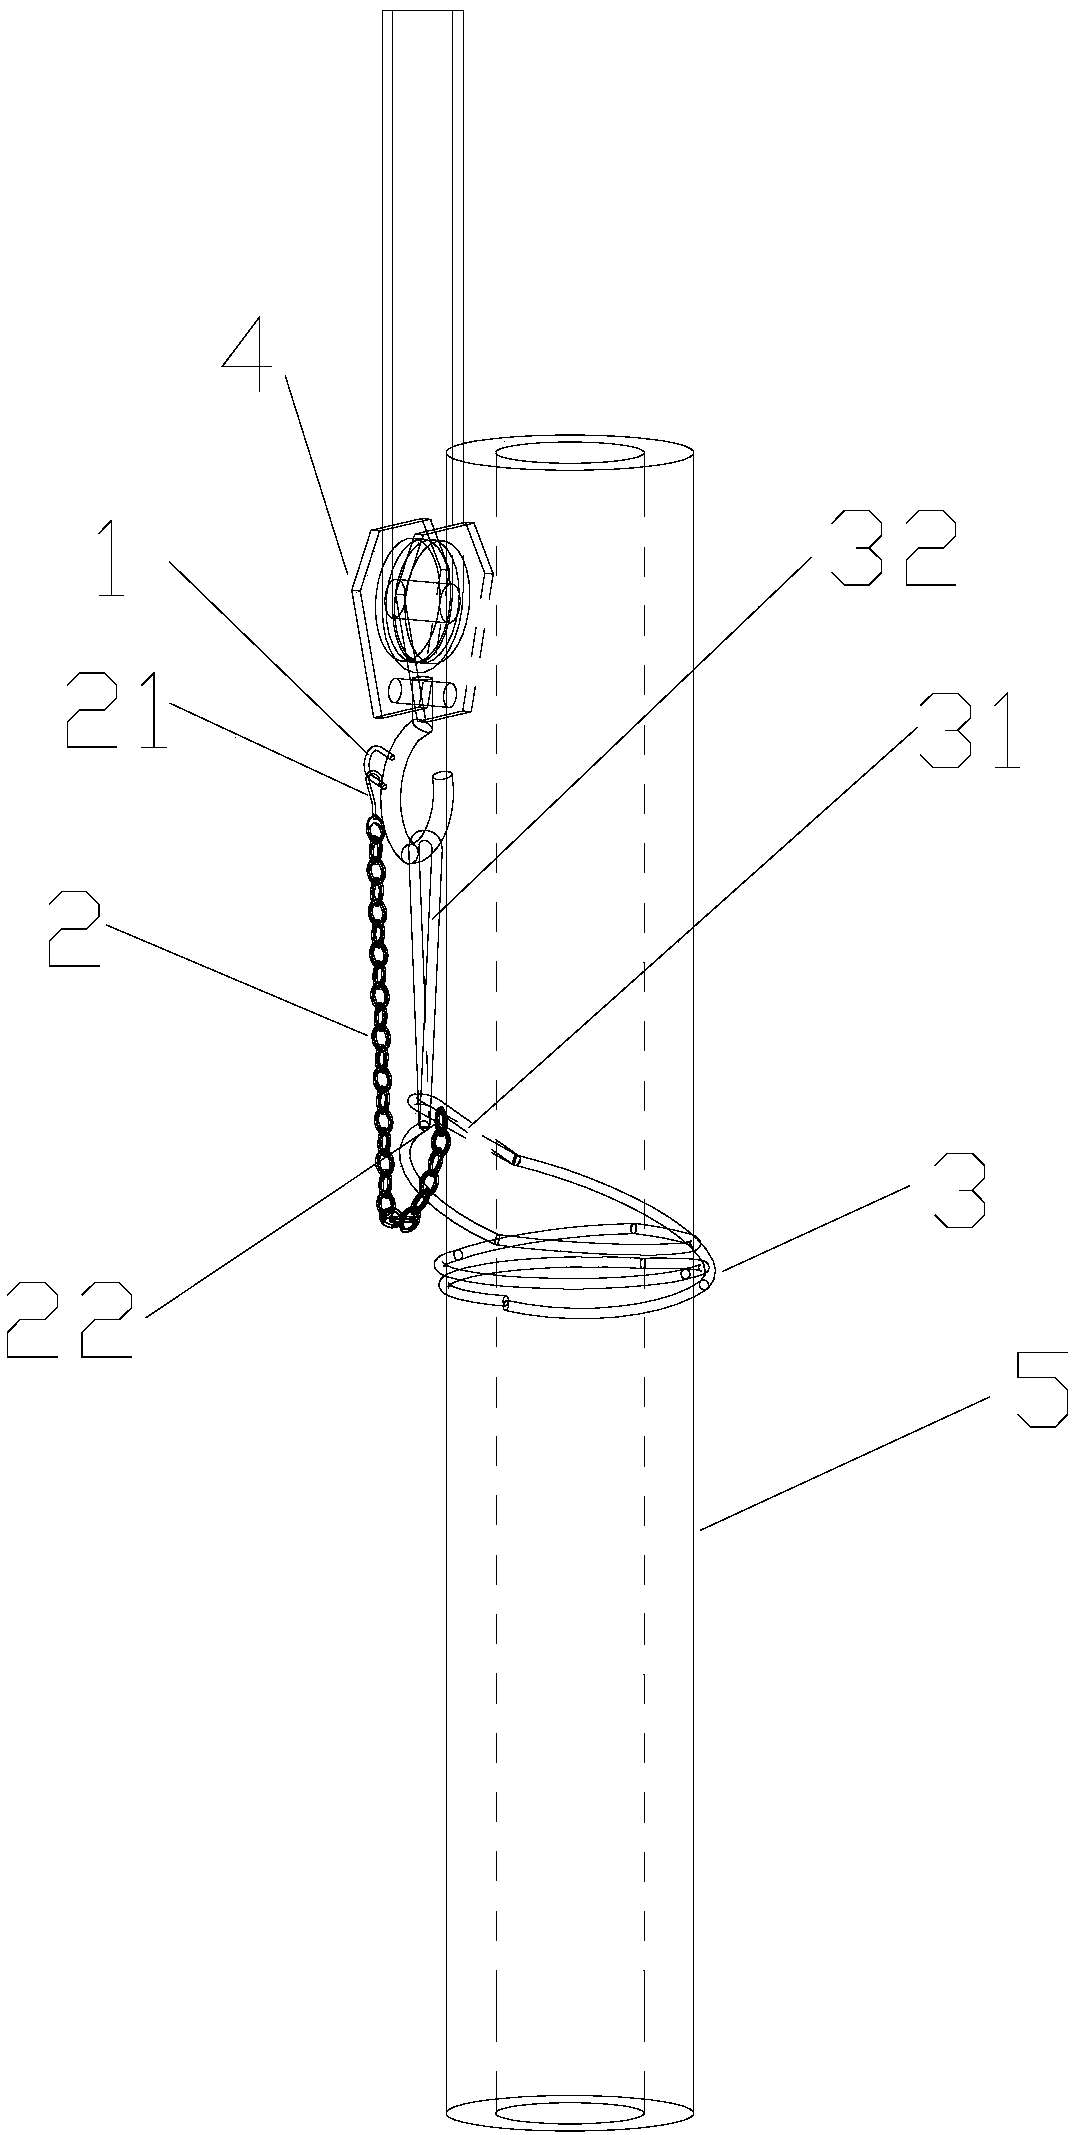 Pile clamping device capable of automatically falling off